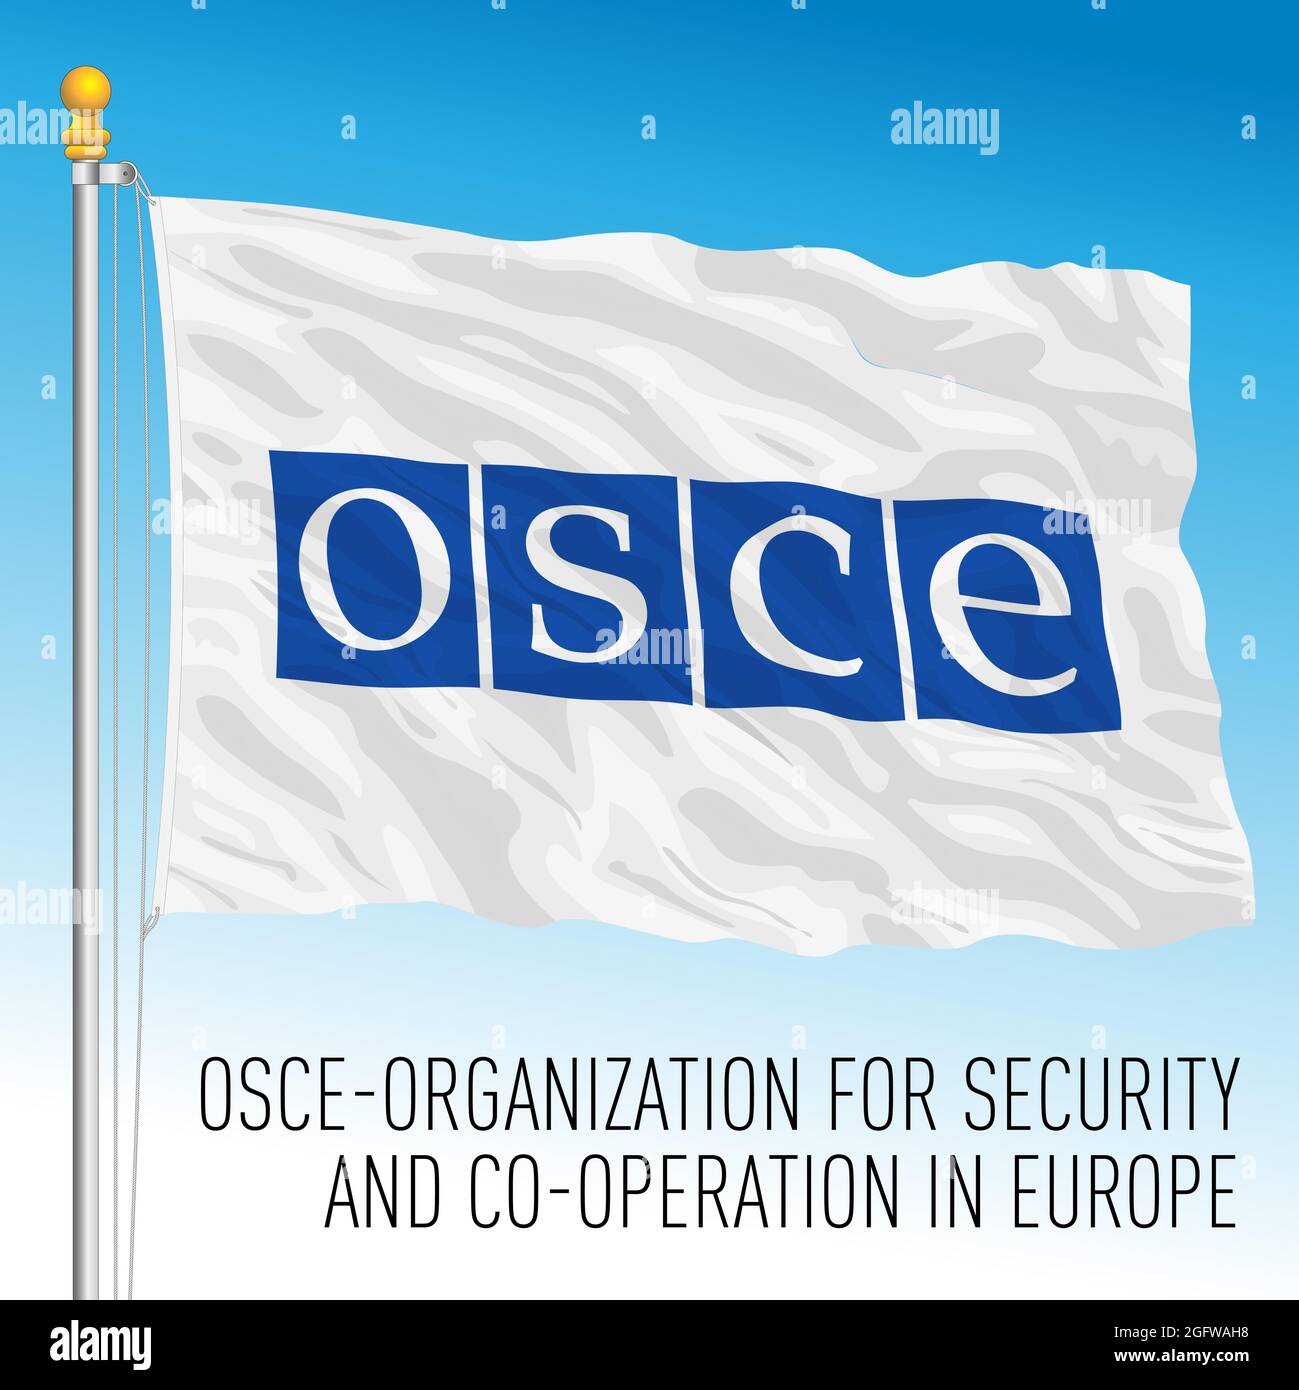 OSCE, Organization for Security and Co-operation in Europe flag, european organization, vector illustration Stock Vector